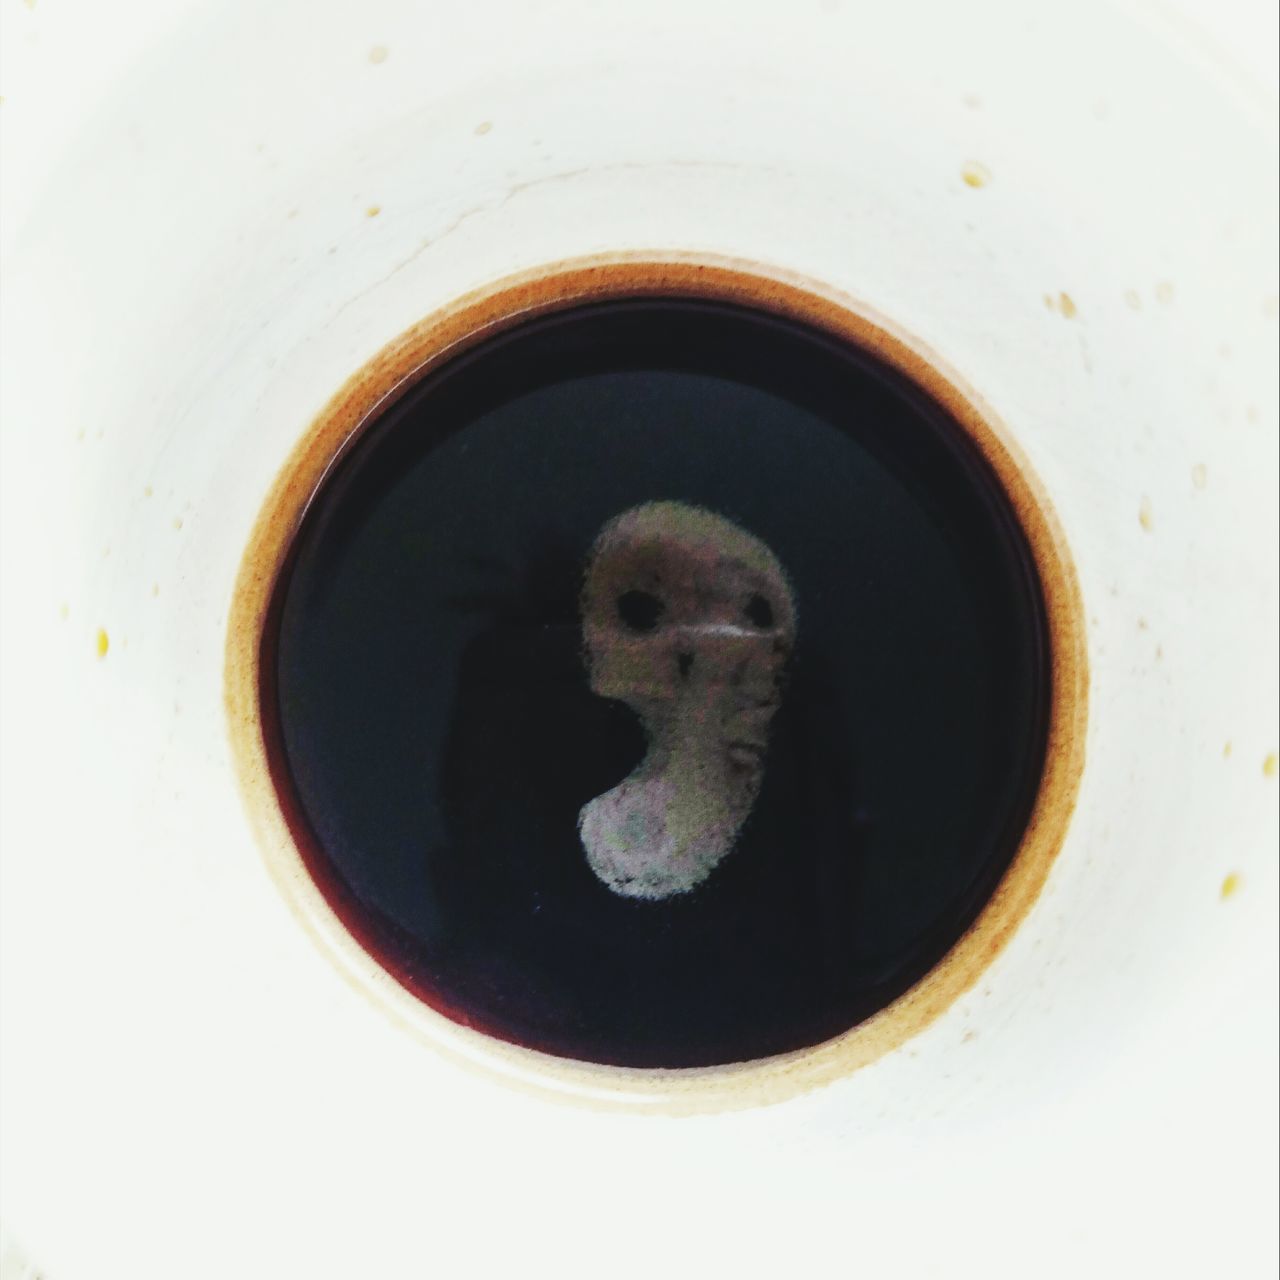 close-up, no people, cup, drink, coffee cup, coffee, coffee - drink, mug, indoors, animal, hole, geometric shape, circle, directly above, refreshment, food and drink, animal themes, one animal, shape, vertebrate, crockery